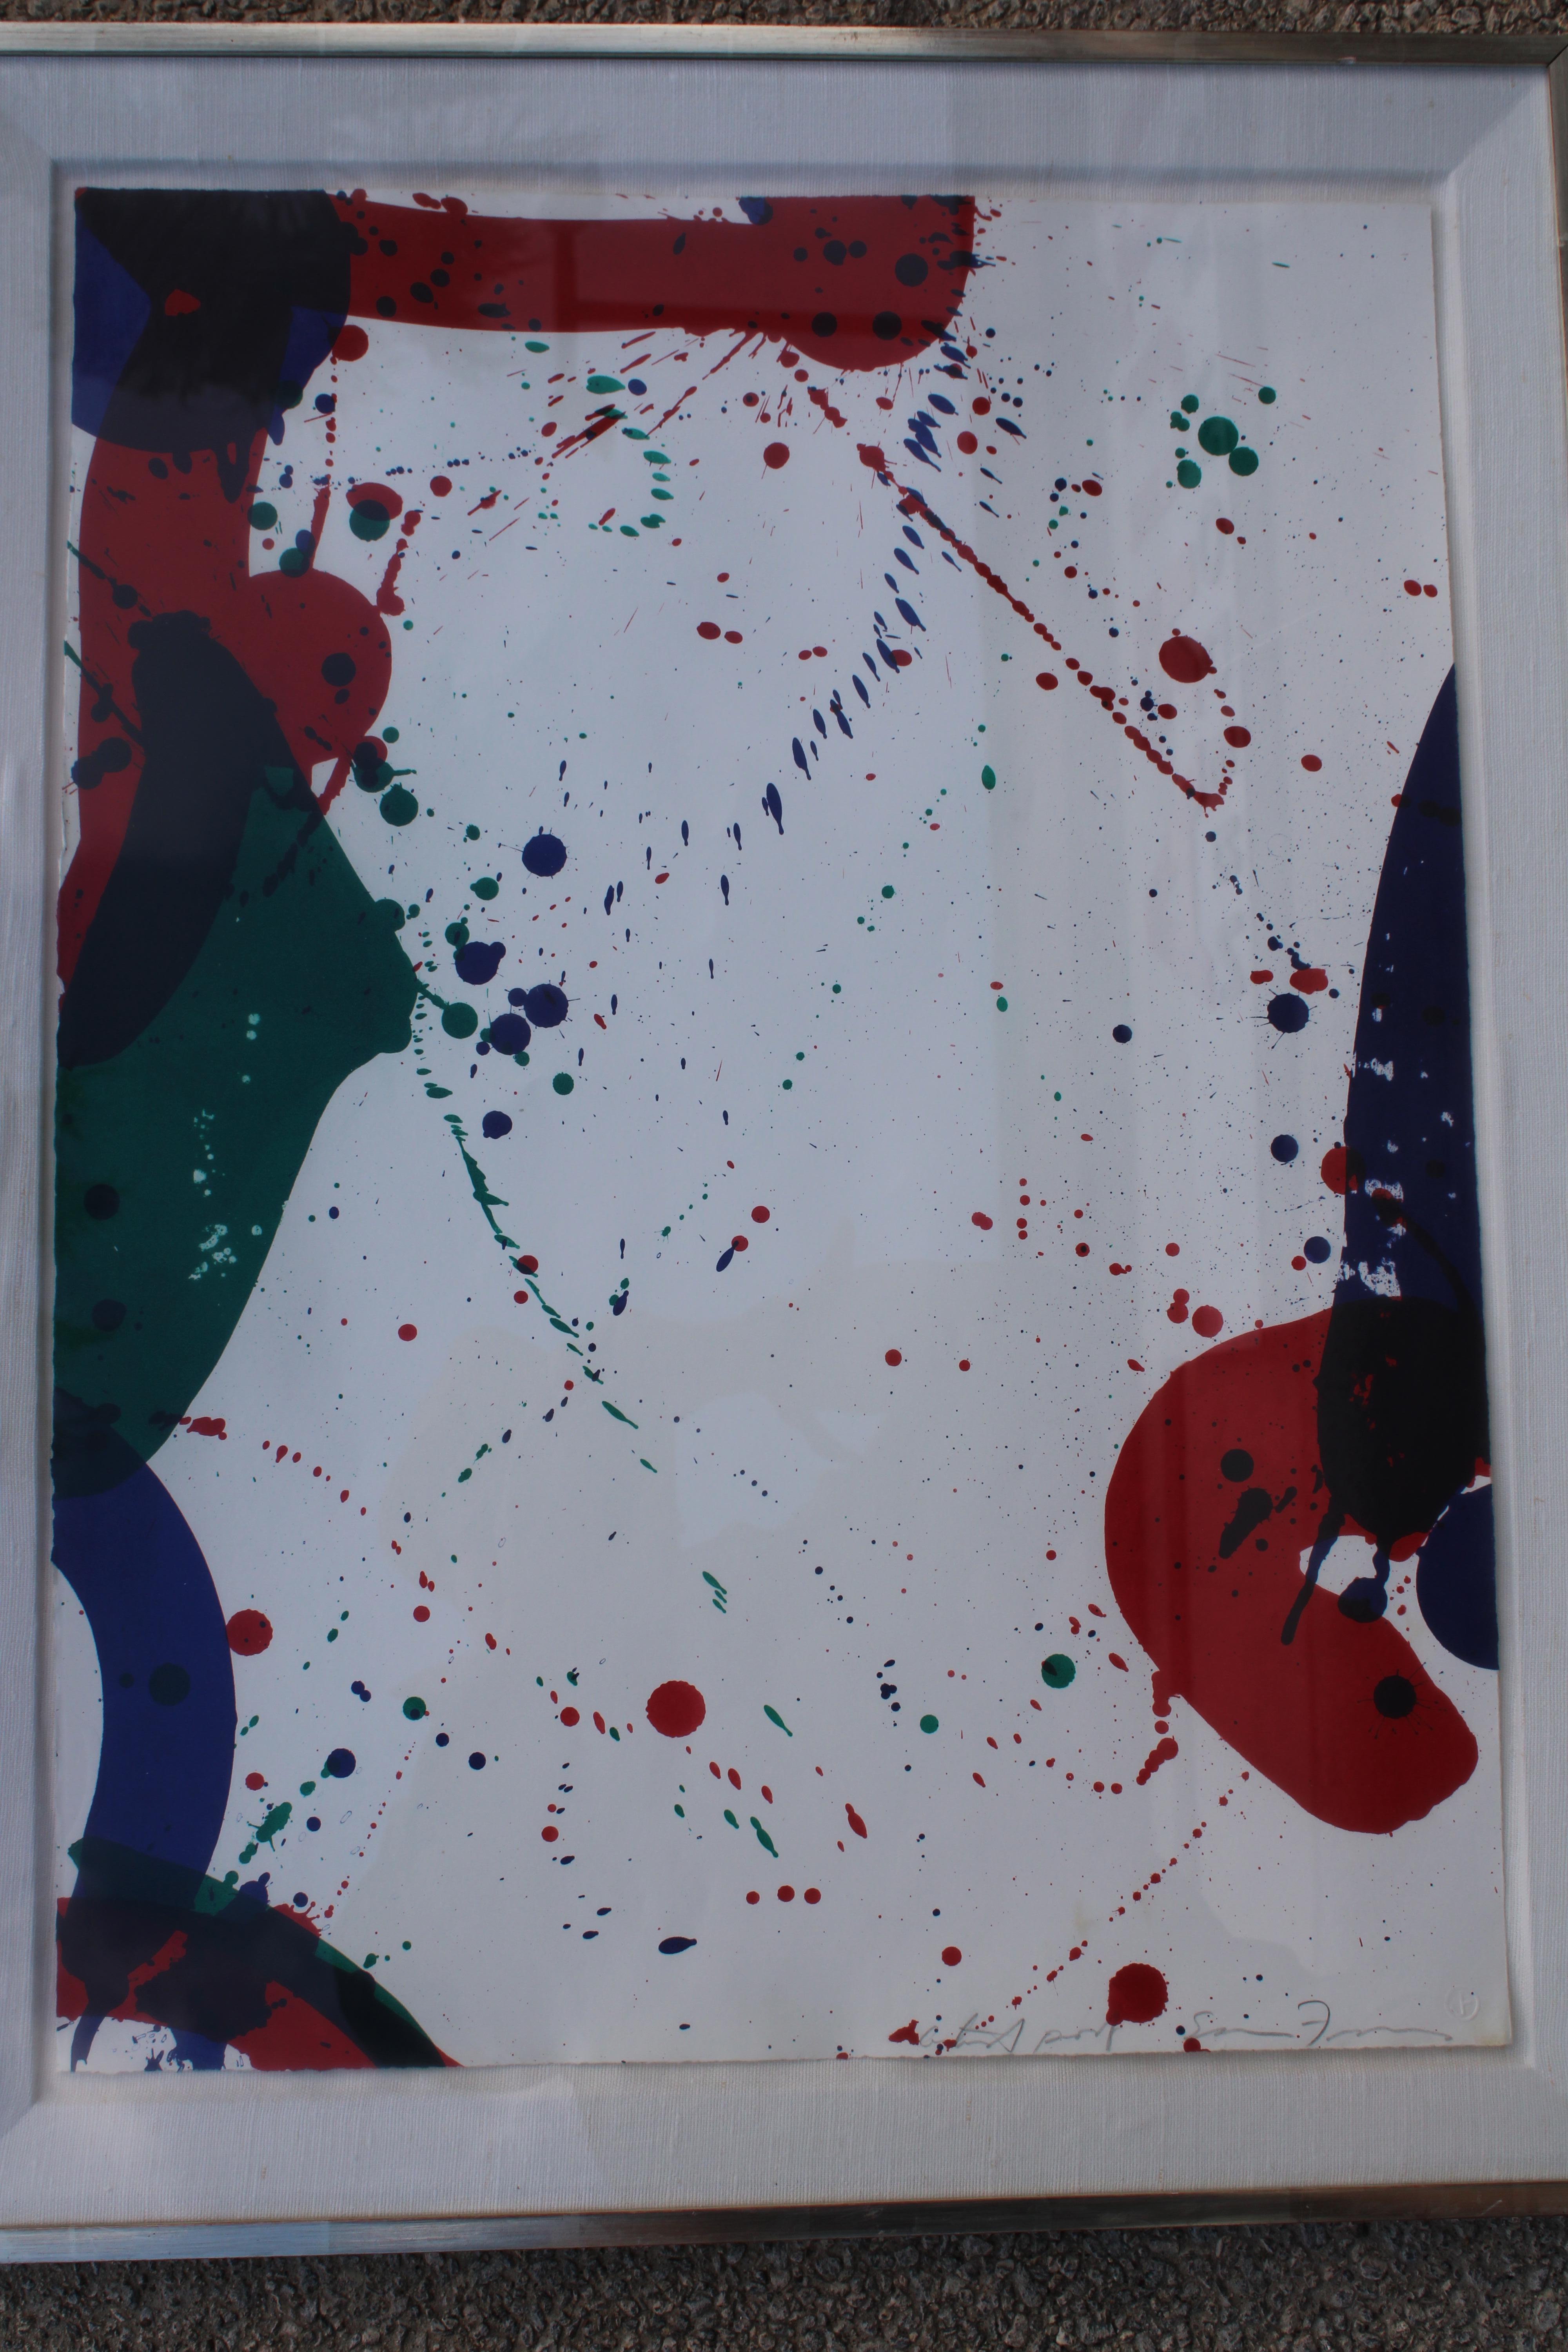 Abstract Sam Francis (1923-1994) Artist Proof lithograph from the early 1960s. This piece was acquired in 1984 from the Smith Anderson Gallery. Framed it measures 23.25